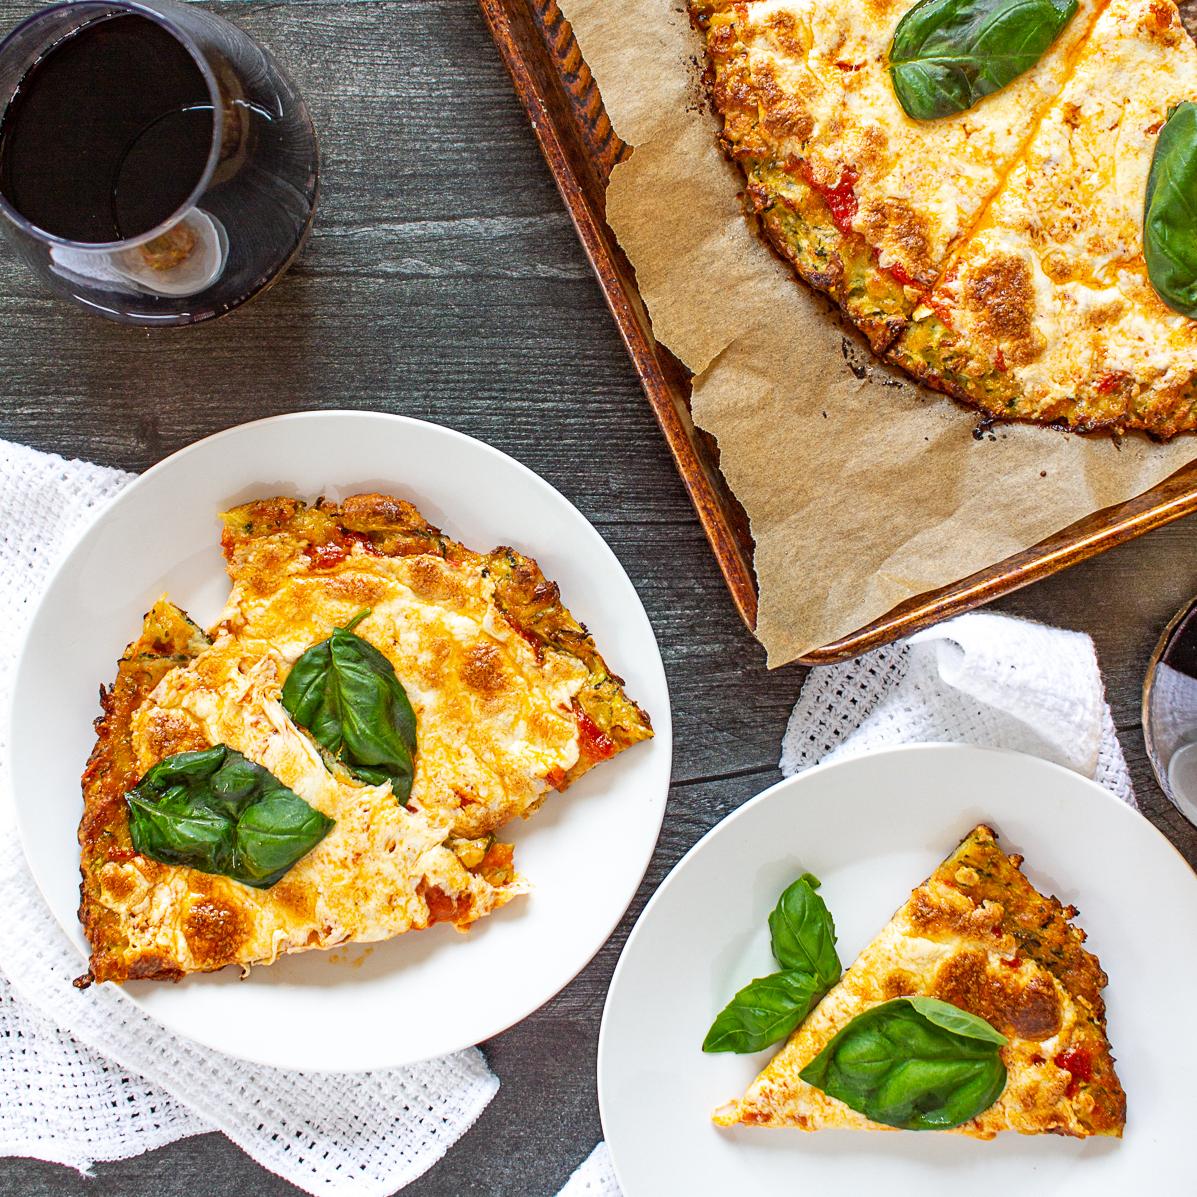  Who says you can't have your pizza and eat it too? This crust has got you covered.